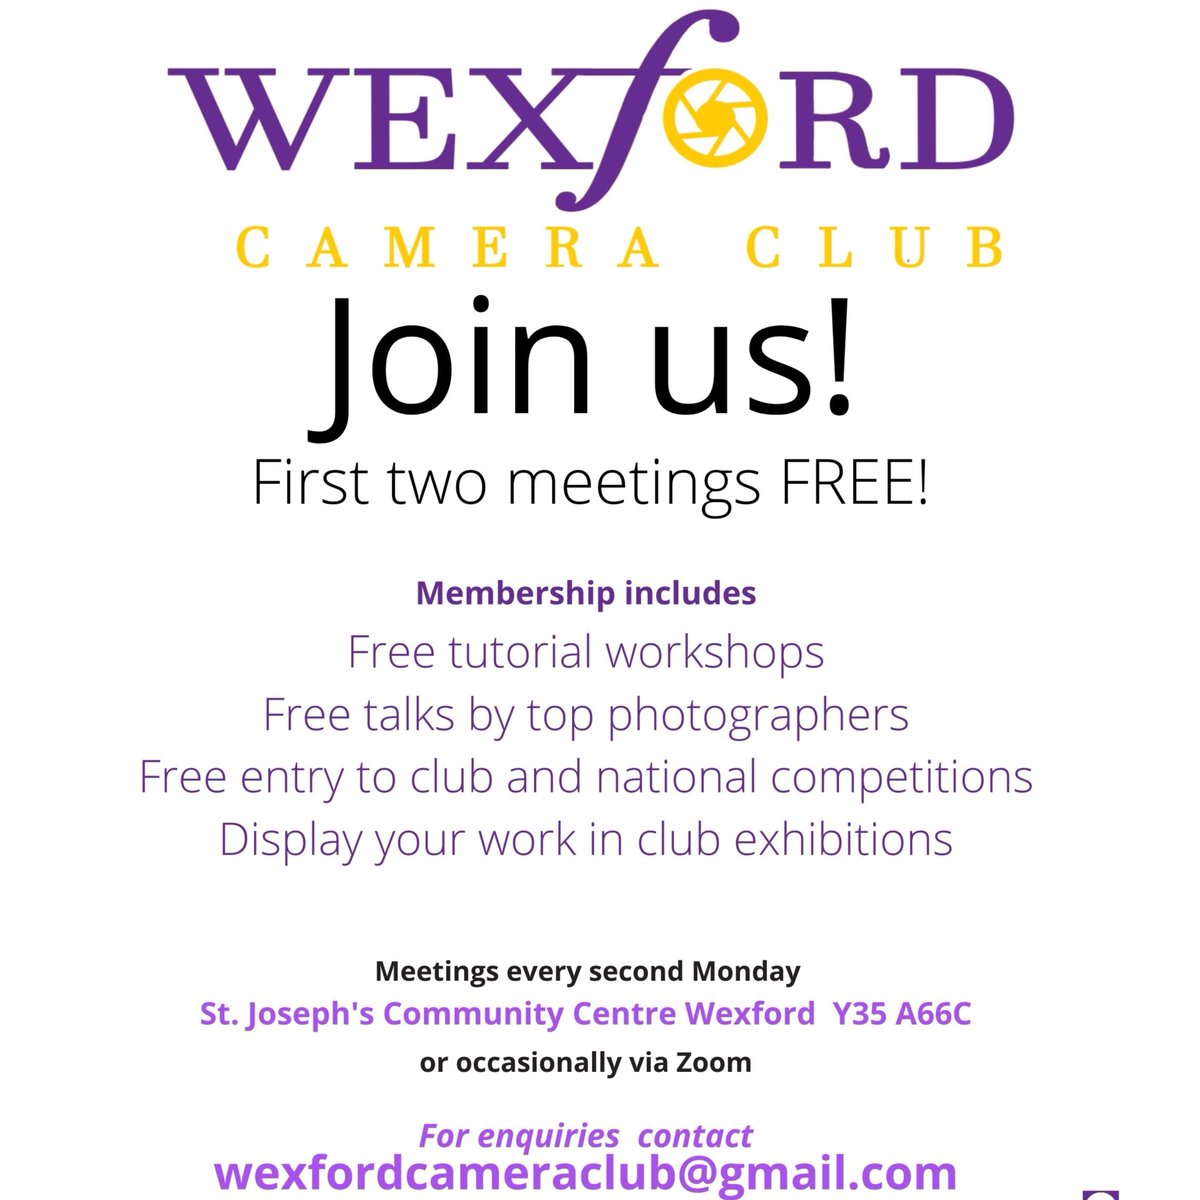 Fancy learning something new this term? Or going back to an old hobby? Join The Wexford Camera Club every second Monday!
#joinus #cameraclub #wexfordcameraclub #visitwexford #whatsoninwexford #wexford #photographyclub #photography